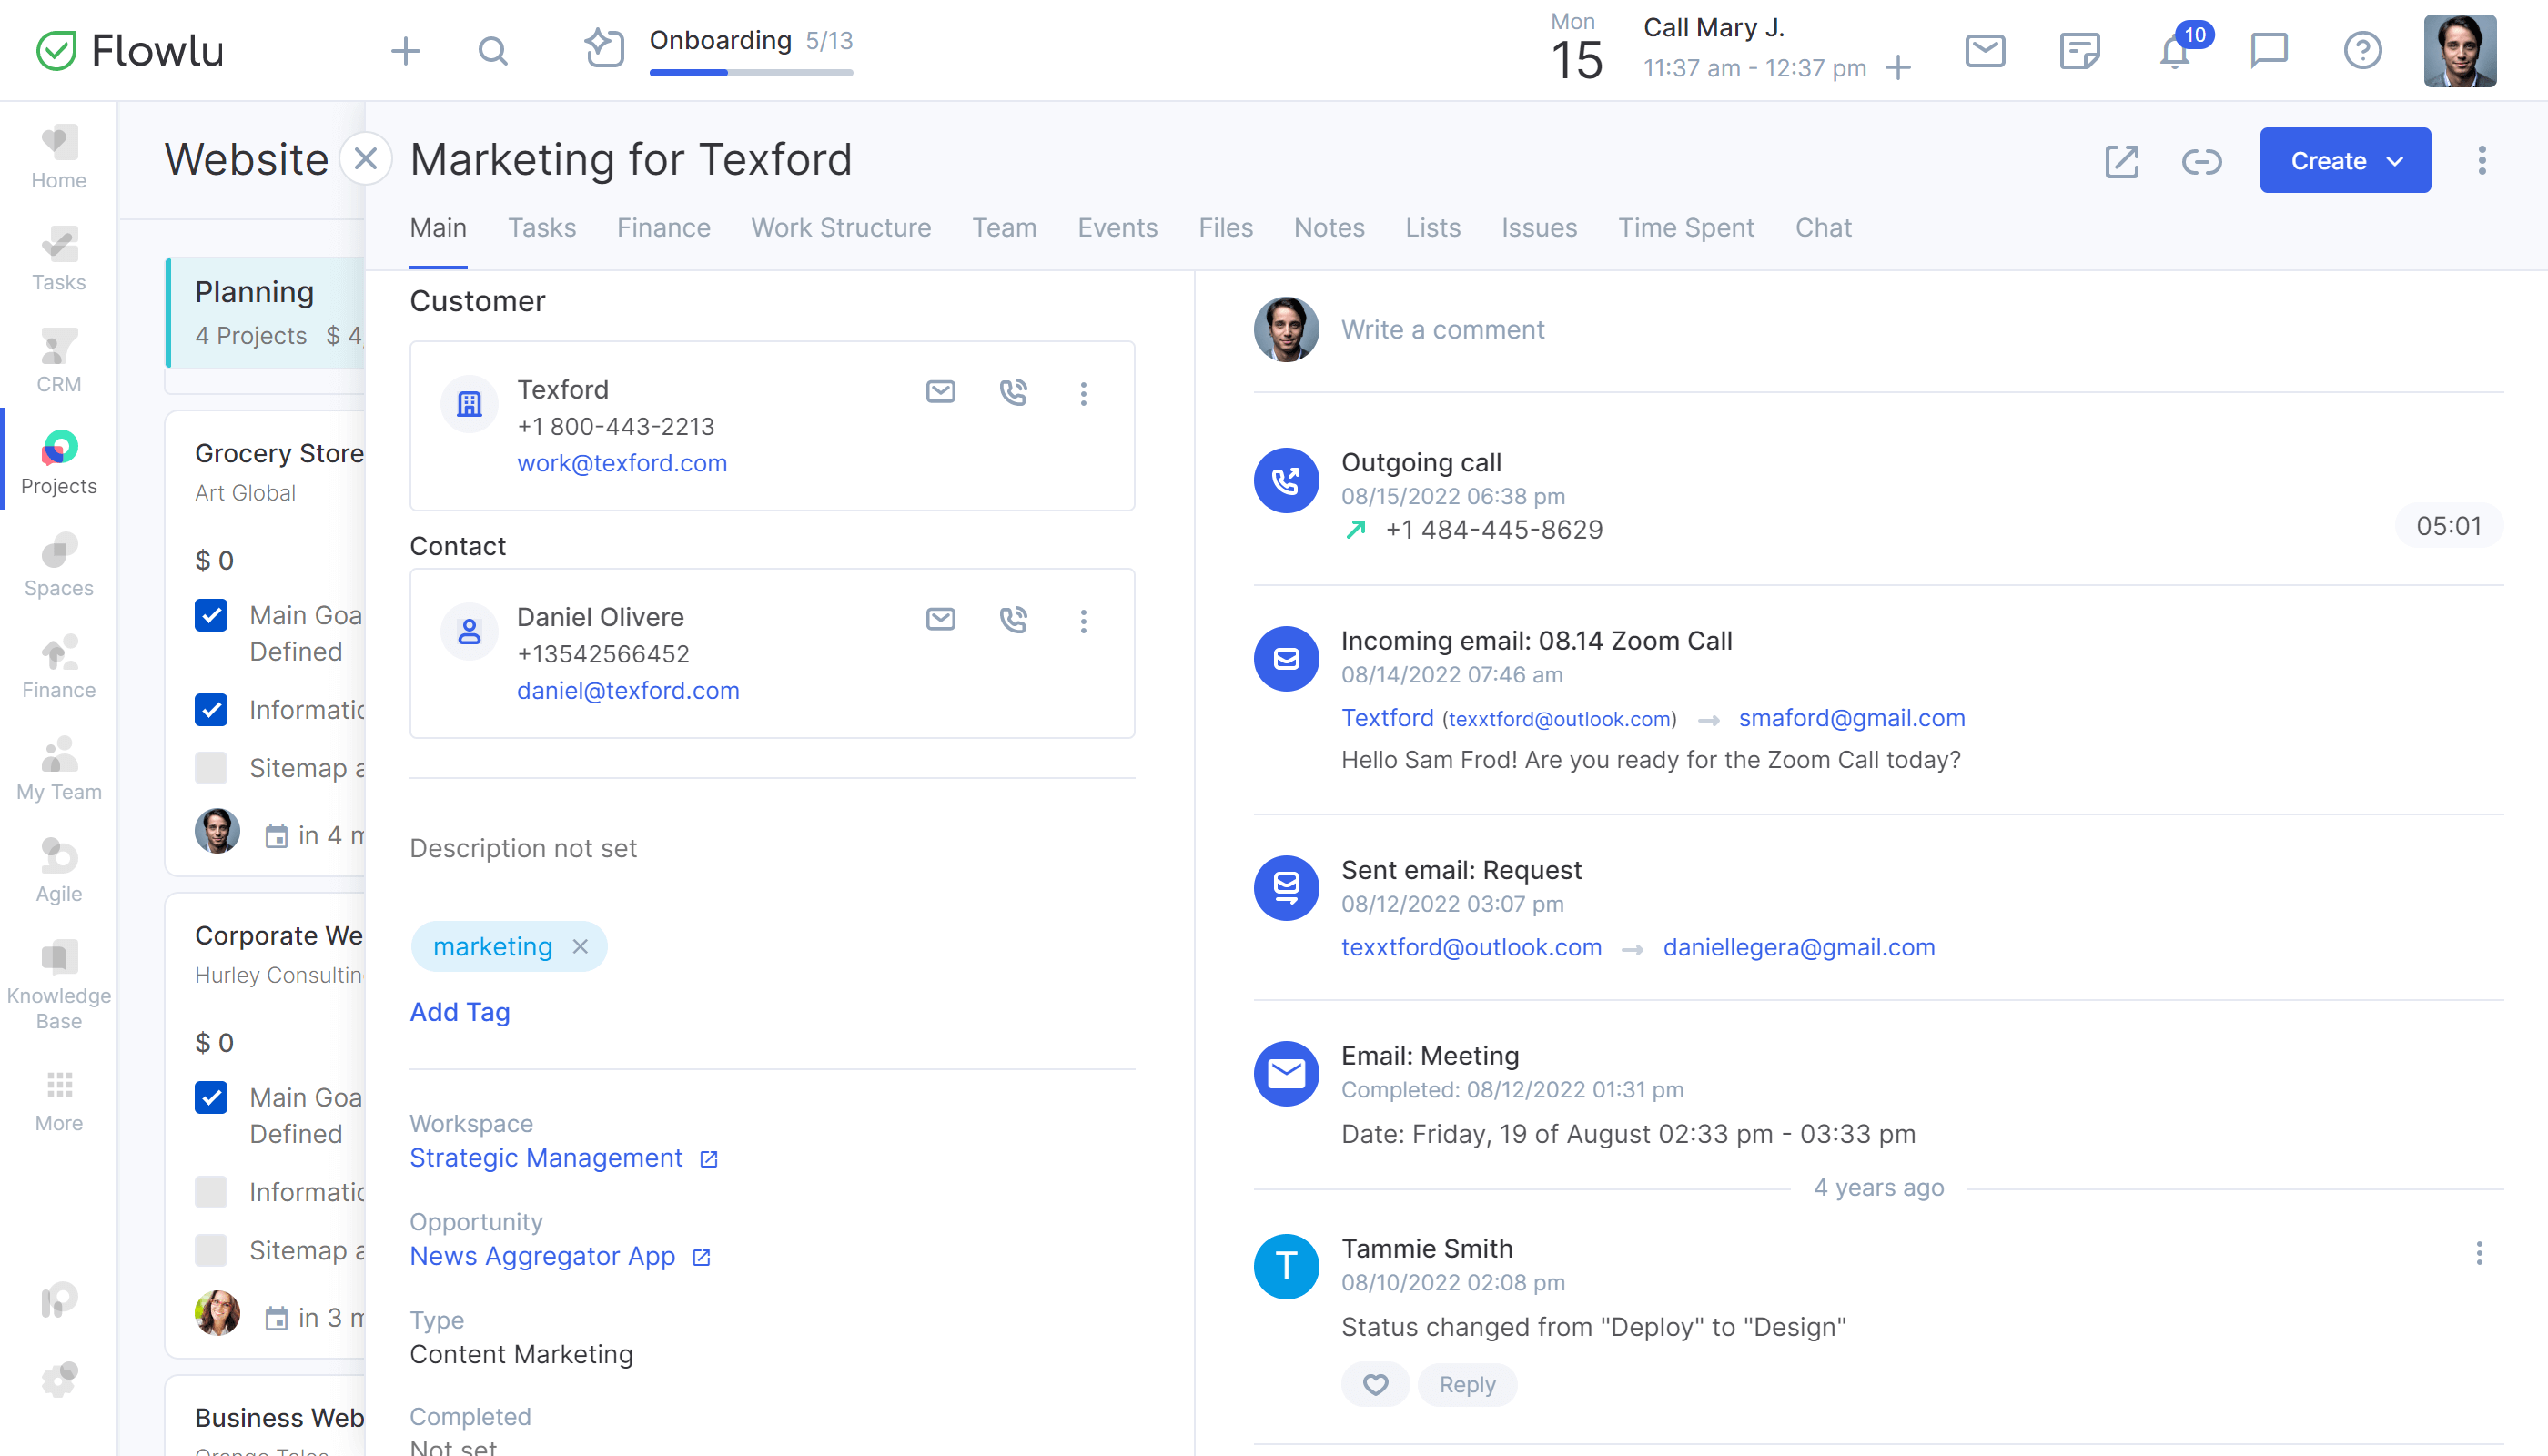 Flowlu - Keep All Emails in One Place